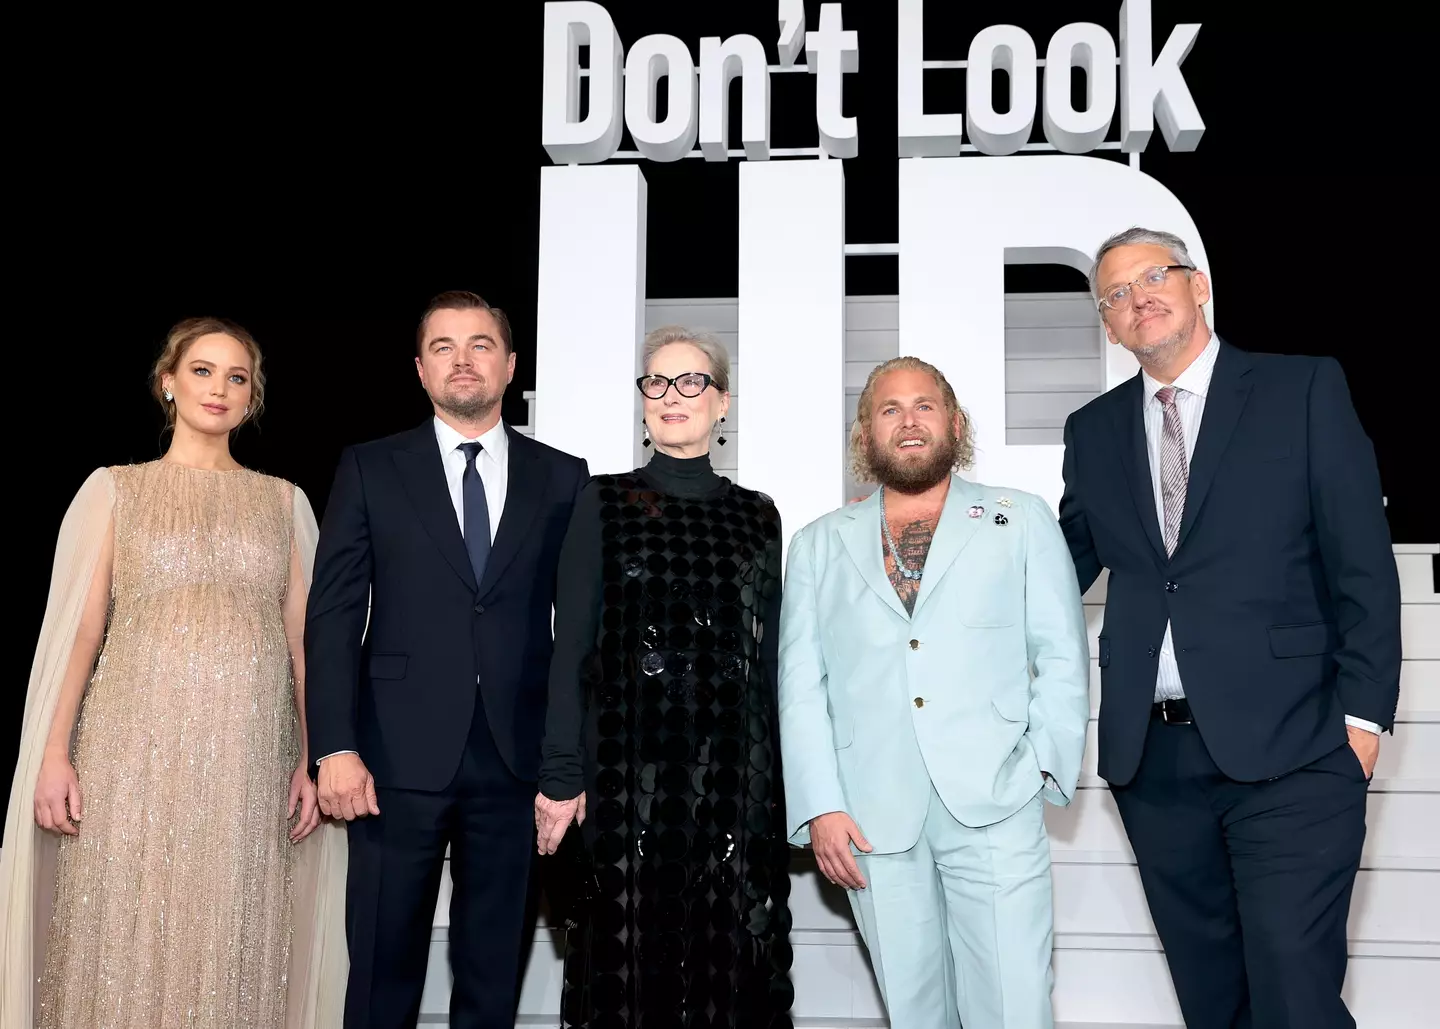 Adam McKay previously worked with the streaming giant for smash hit film Don't Look Up.